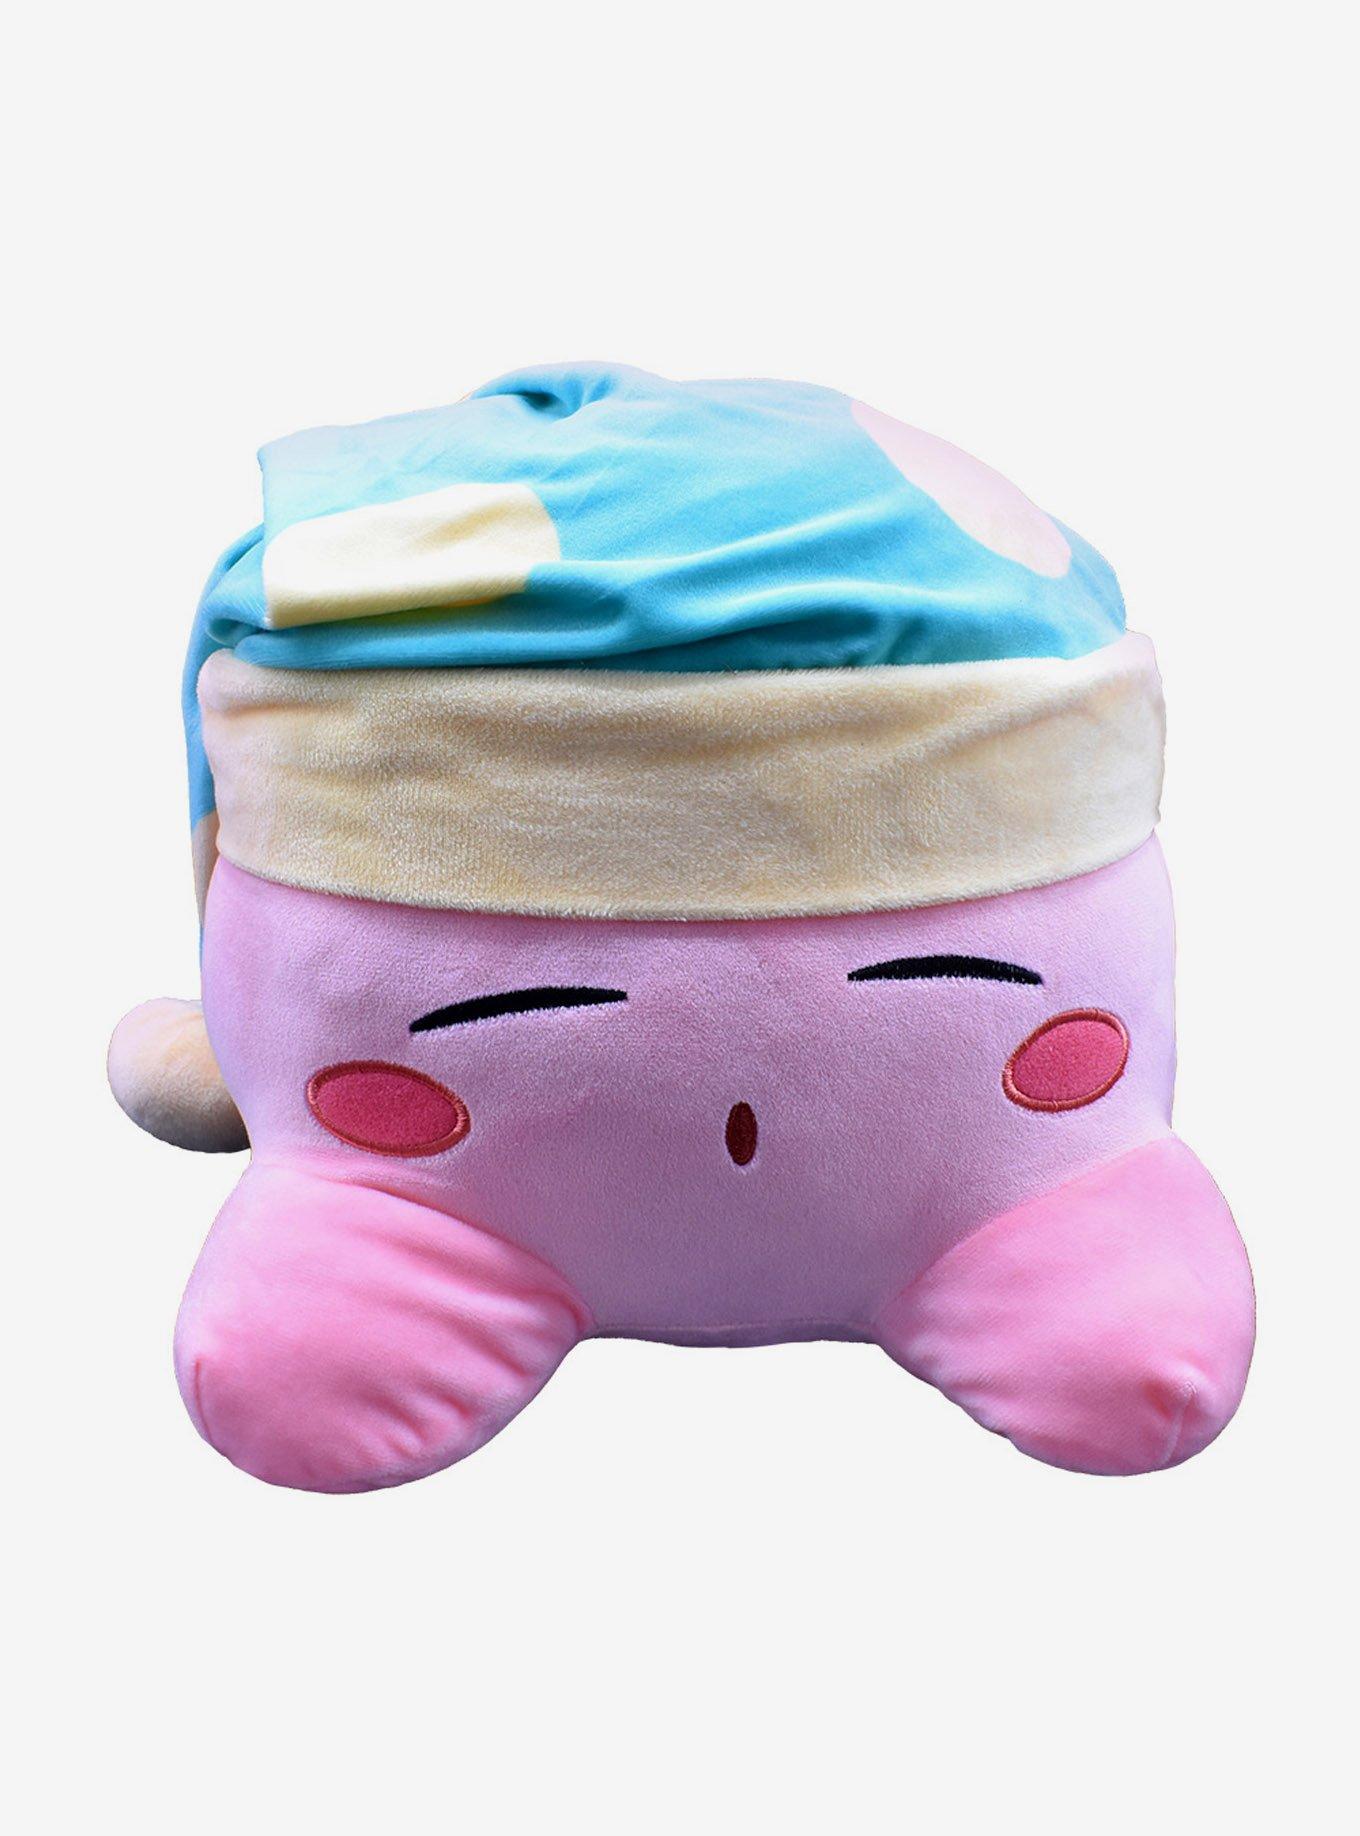 Anime Star Kirby Summer Swimming Kirby Stuffed Peluche Plush Toy High  Quality Cute Dolls Christmas Birthday Great Gift For Kids